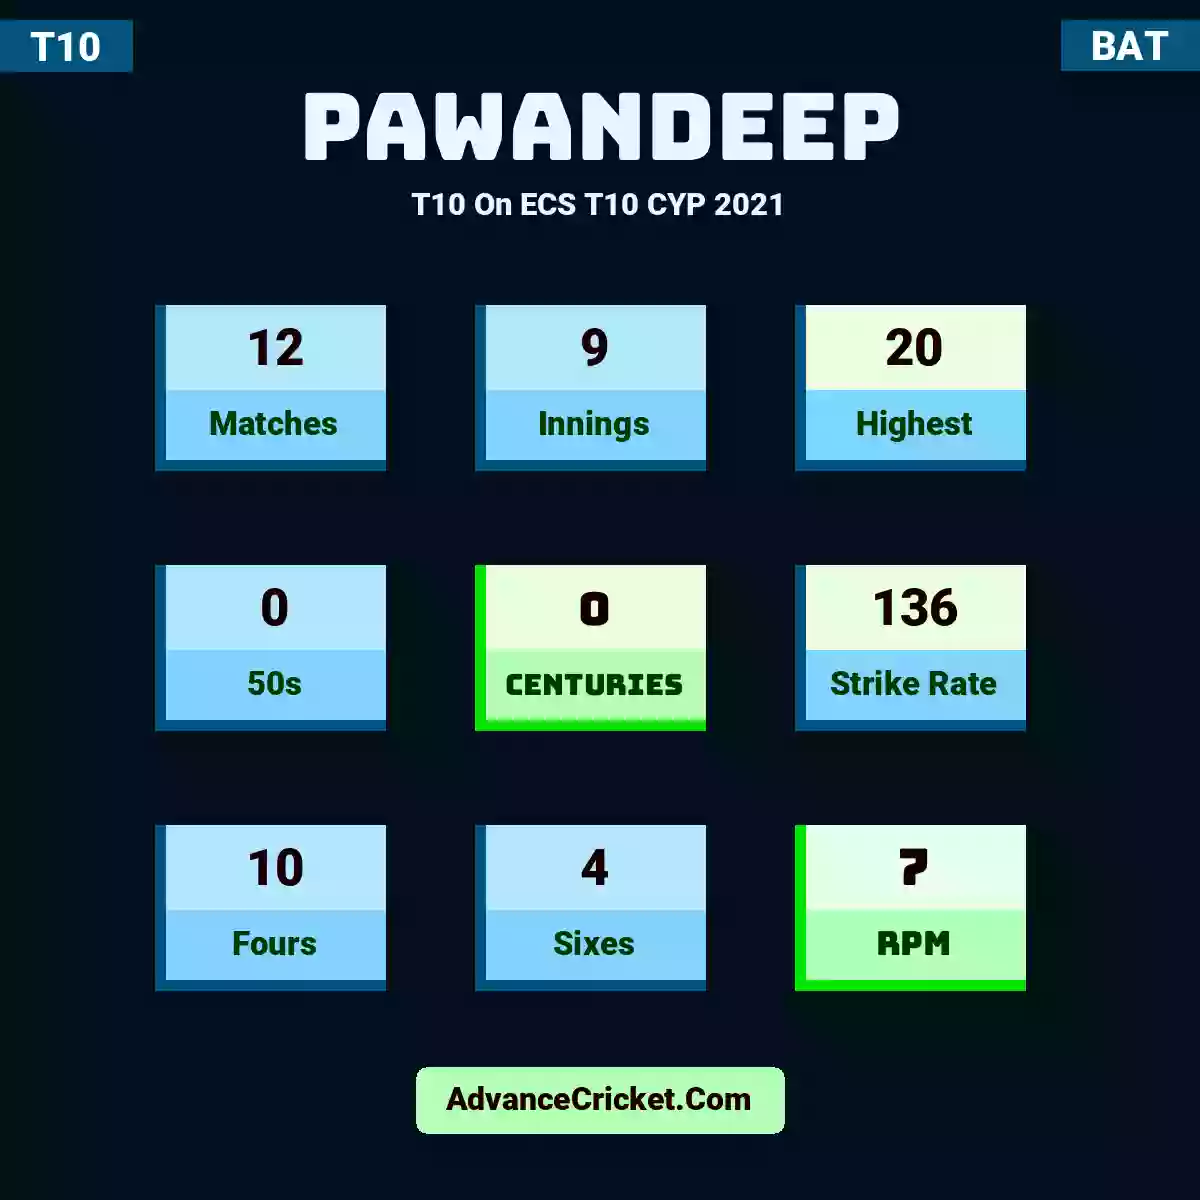 Pawandeep T10  On ECS T10 CYP 2021, Pawandeep played 12 matches, scored 20 runs as highest, 0 half-centuries, and 0 centuries, with a strike rate of 136. Pawandeep hit 10 fours and 4 sixes, with an RPM of 7.